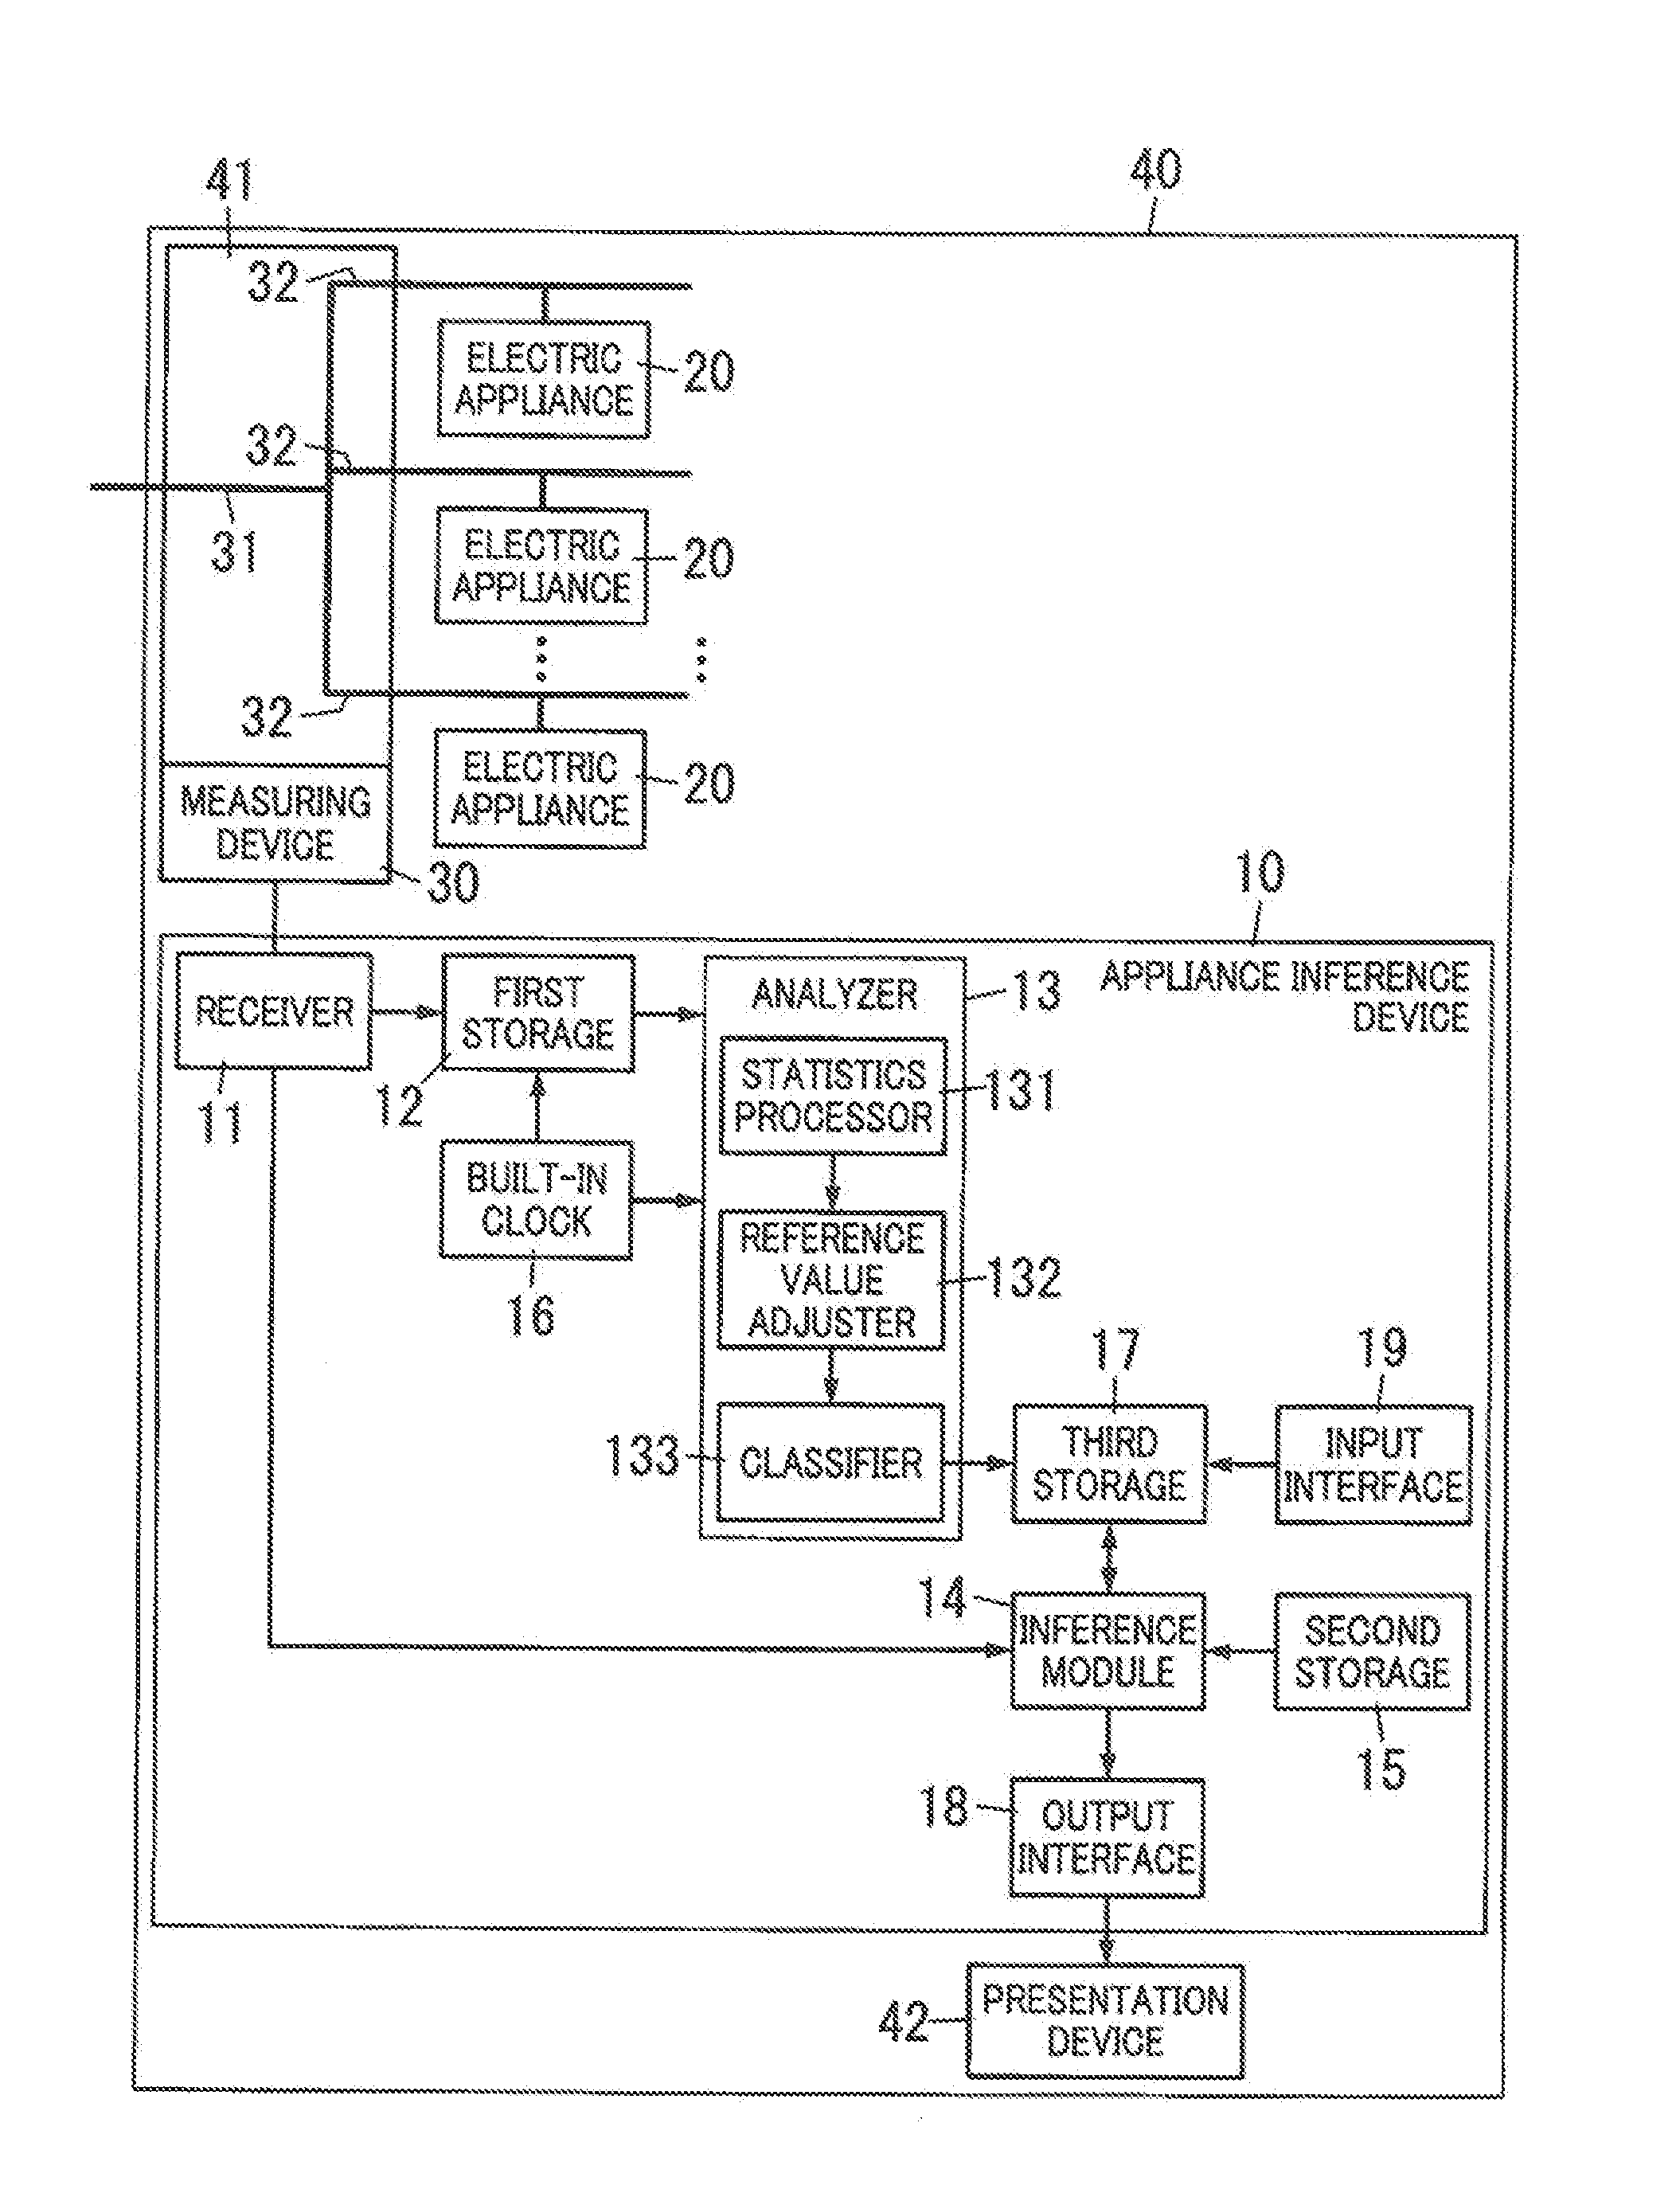 Appliance inference device and program